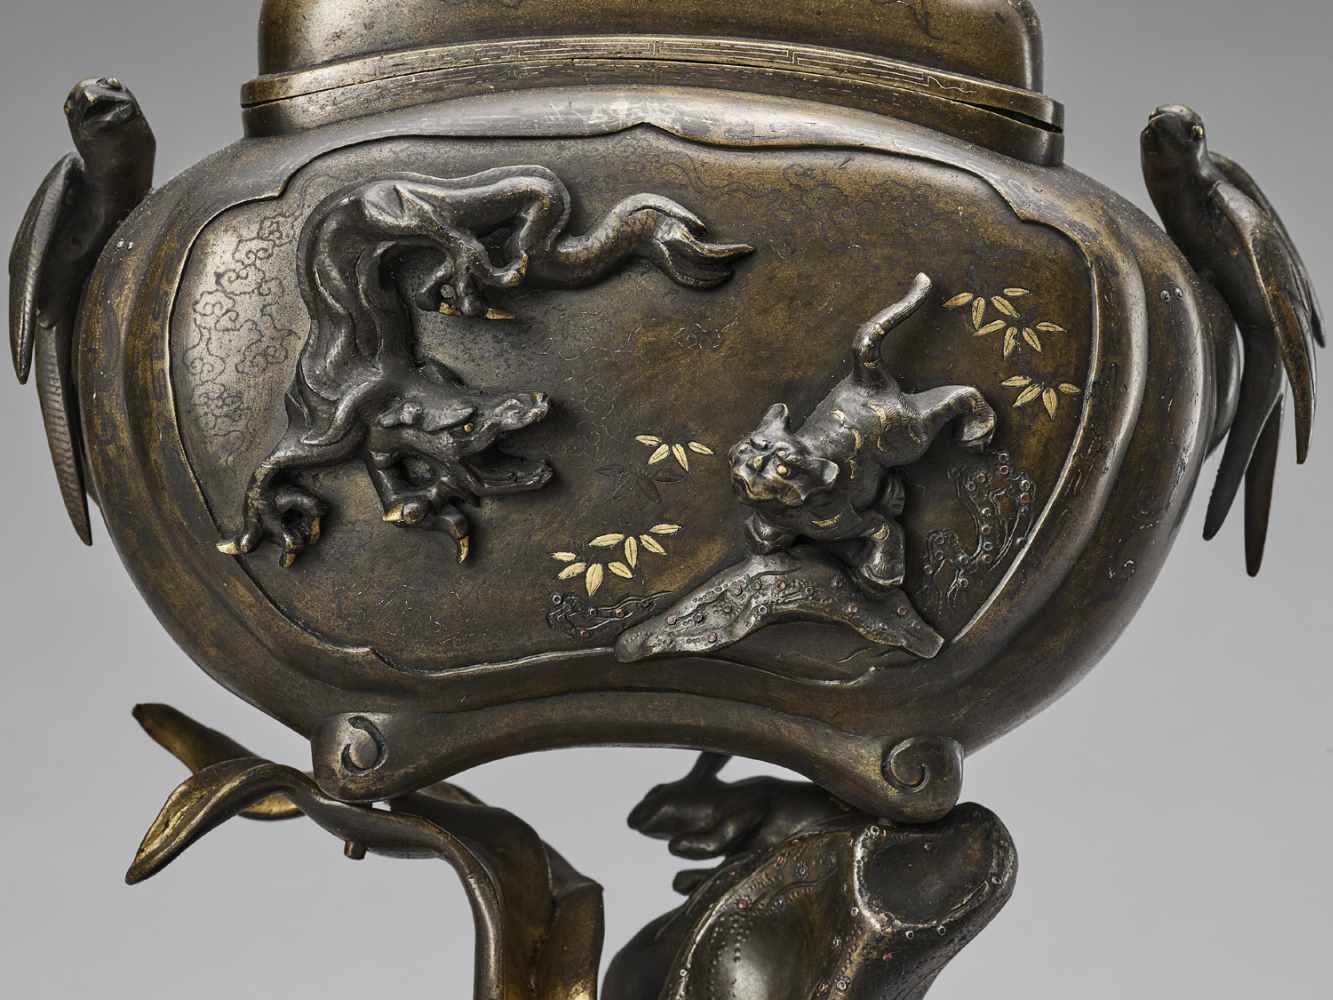 A LARGE AND SPECTACULAR SILVER AND GOLD INLAID KORO (INCENSE BURNER) - Image 3 of 14